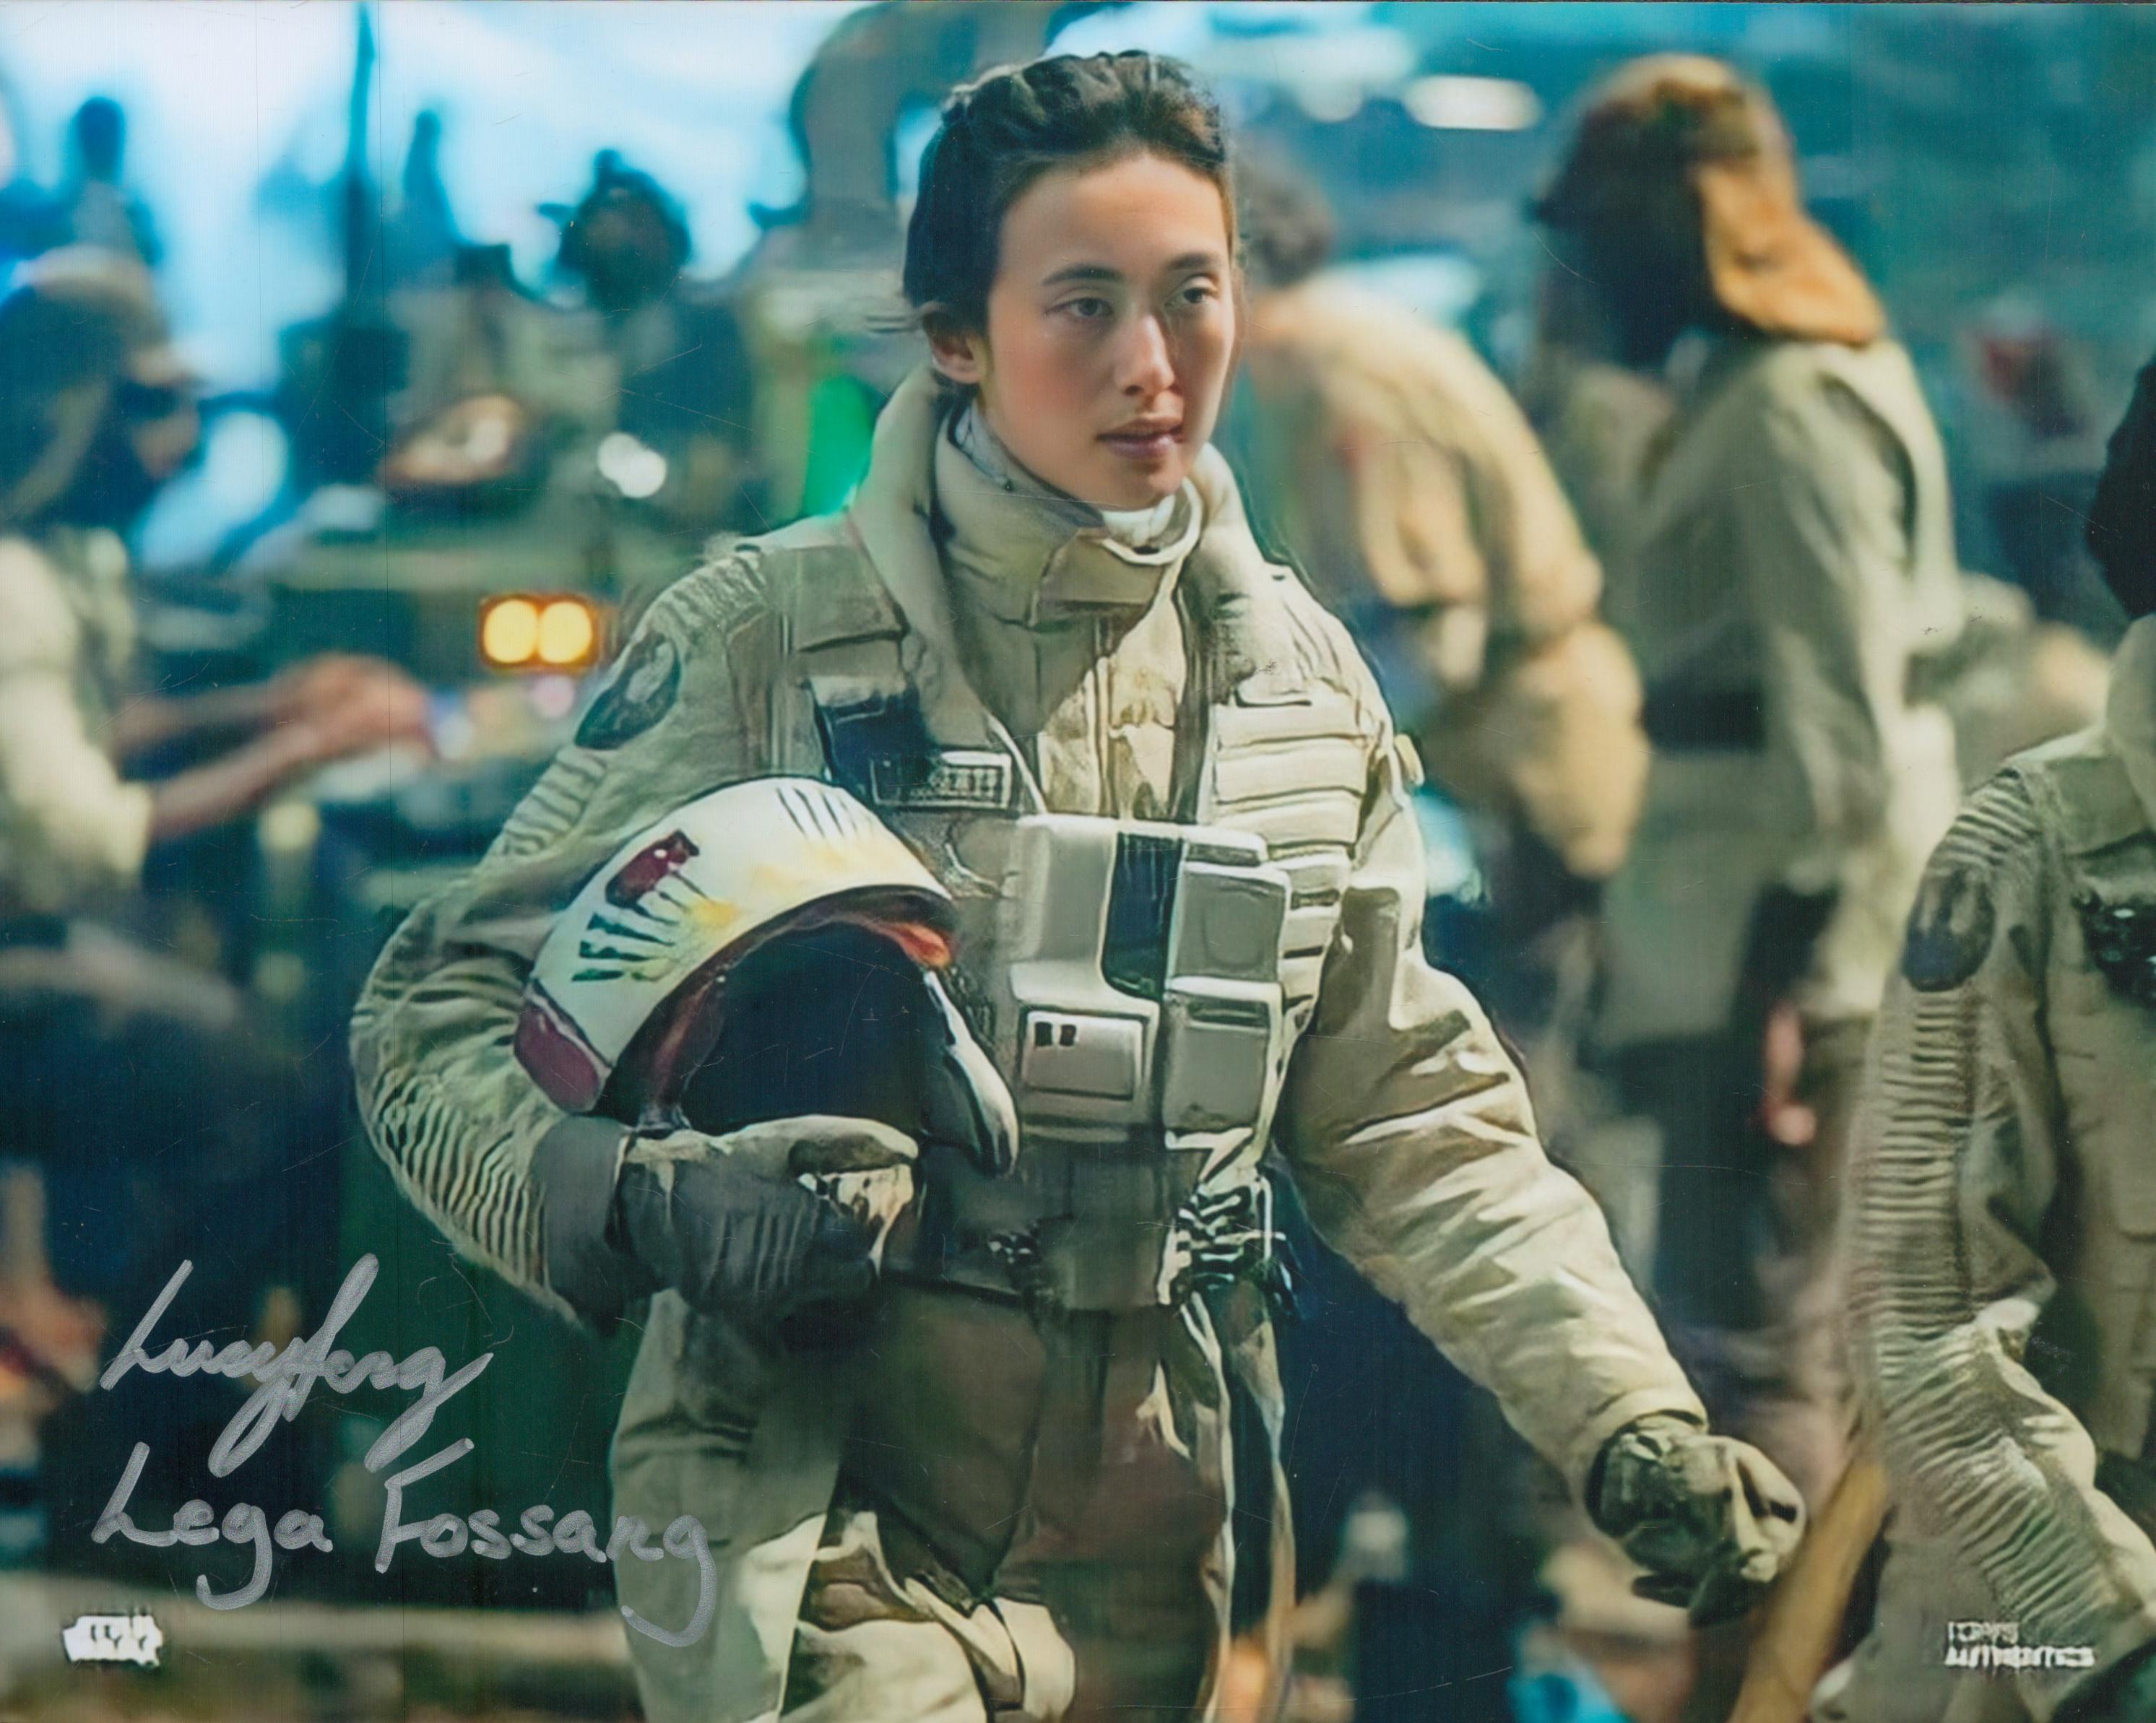 Star Wars The Rise of Skywalker movie 8 x 10 inch colour photo signed by rebel pilot Lucy Feng. Good